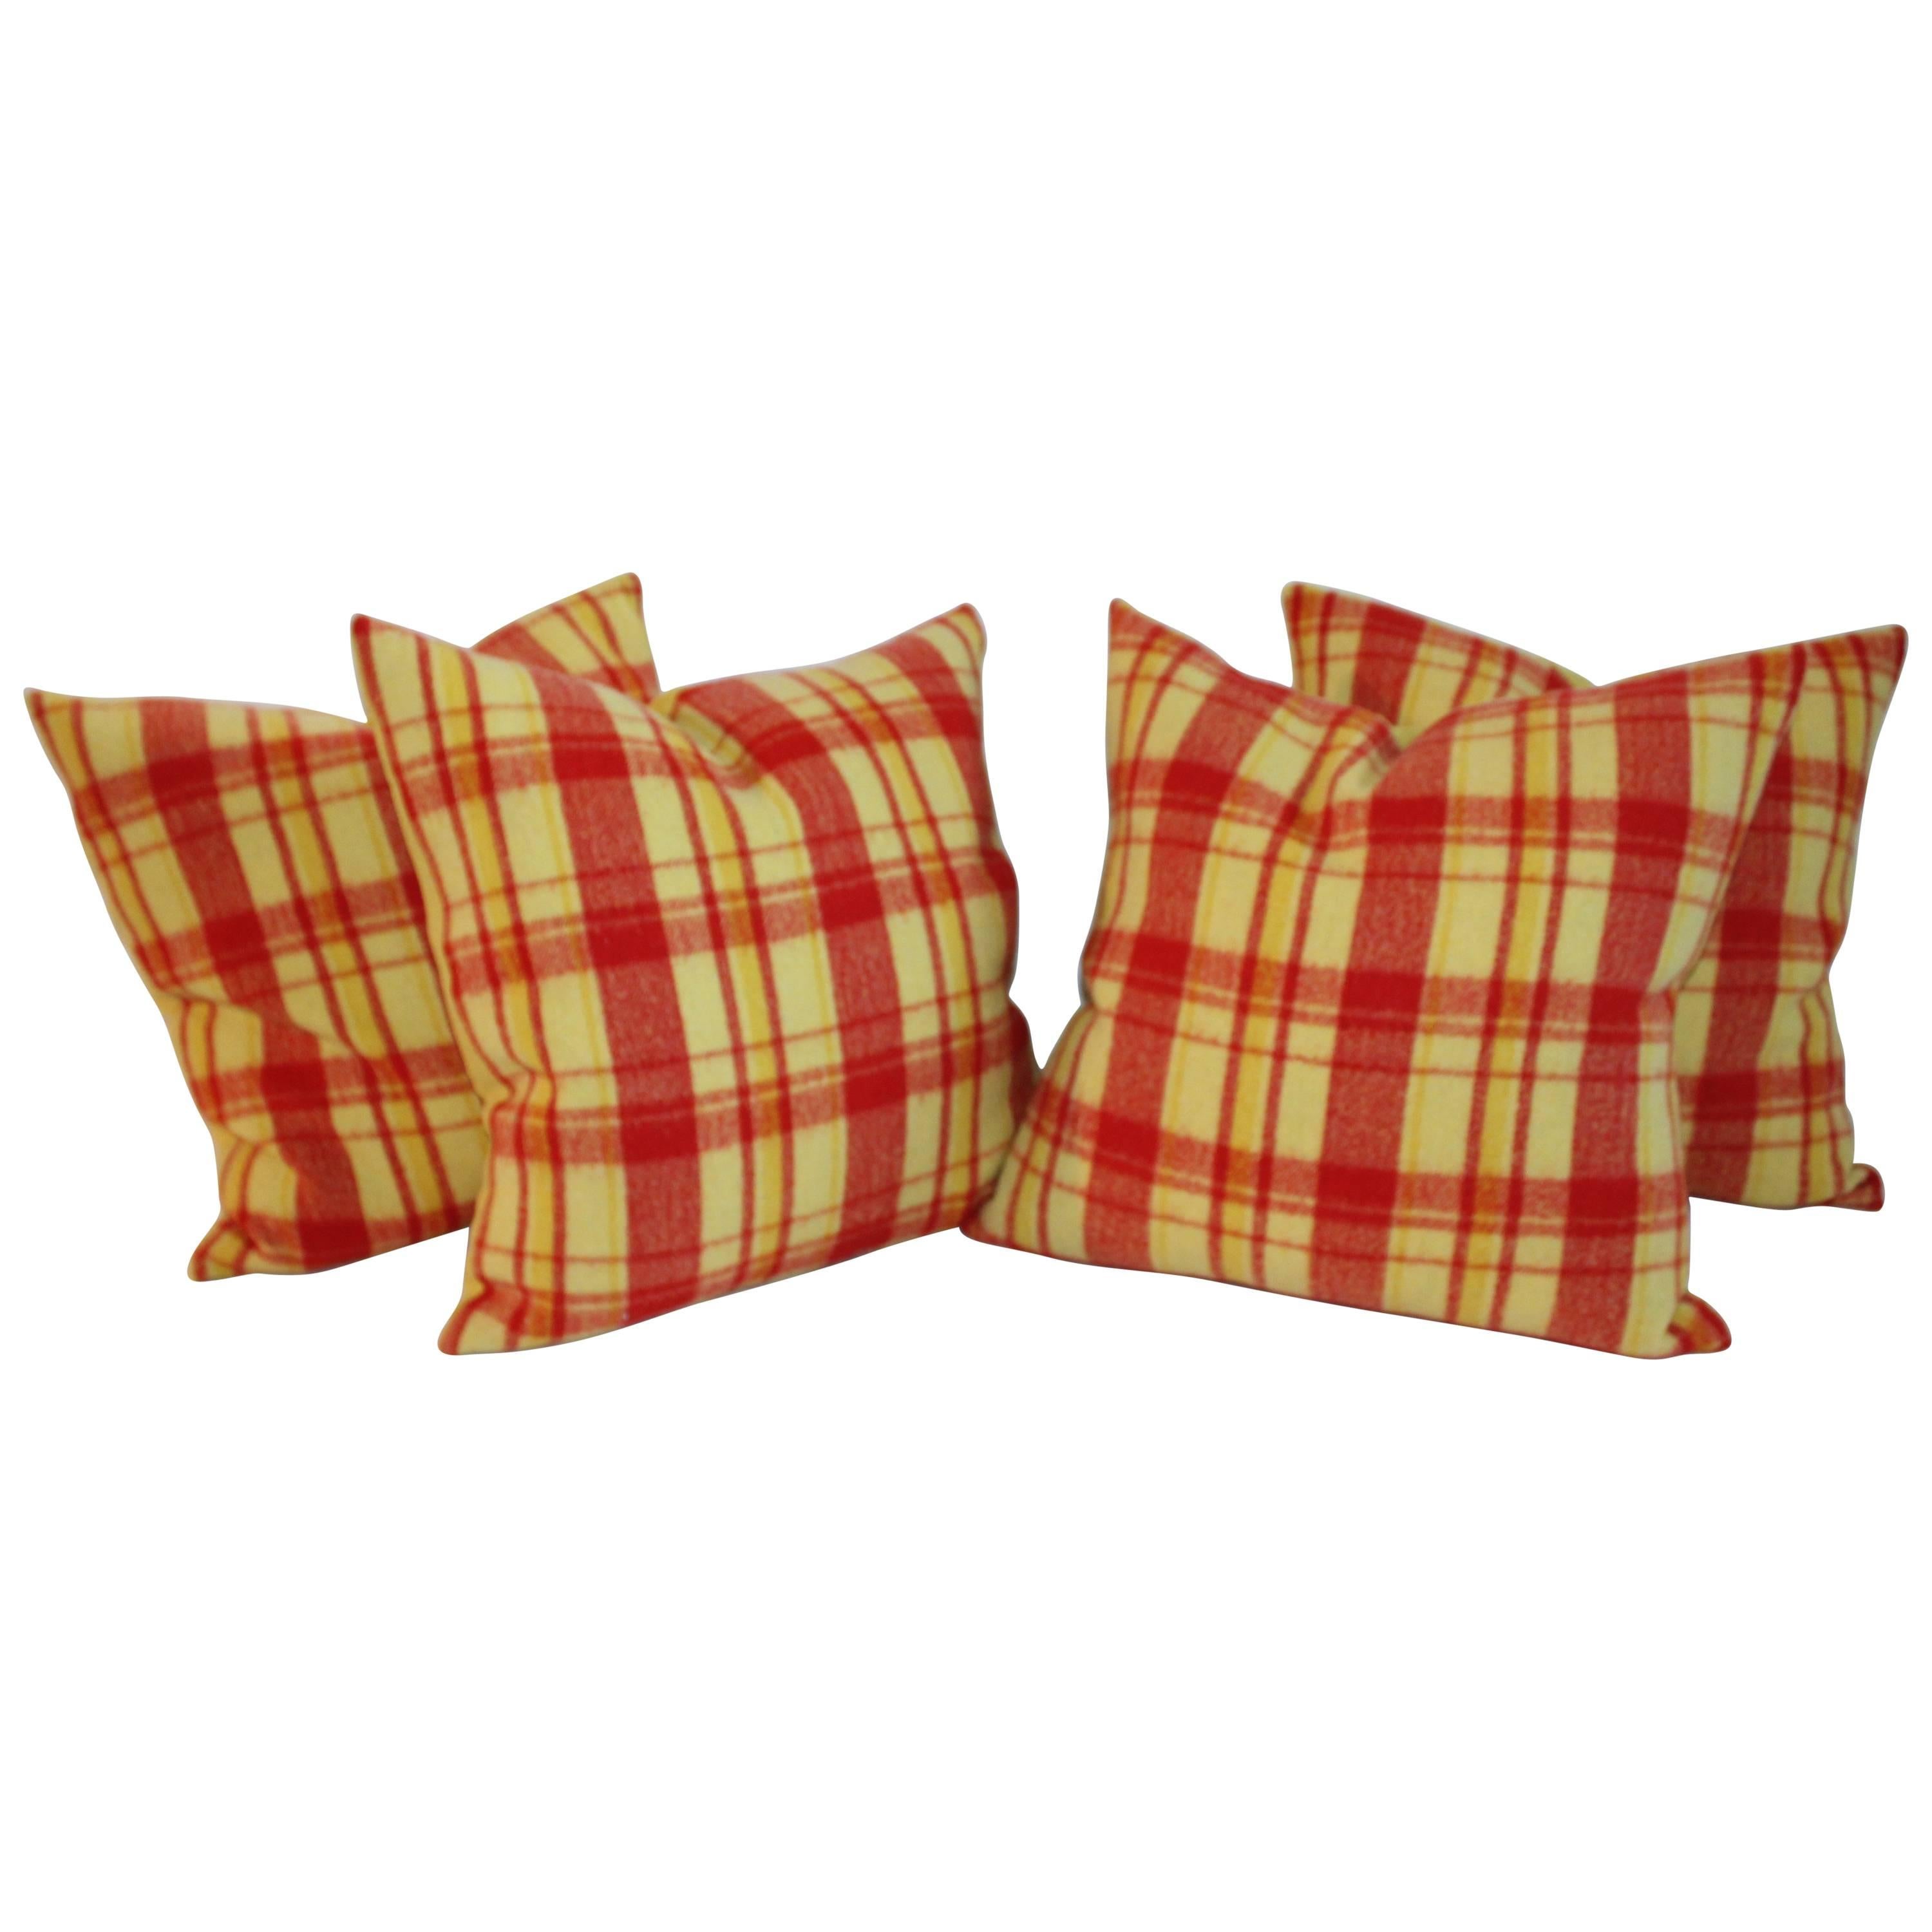 Vibrant Red and Yellow Plaid Horse Blanket Pillows /2 Pairs